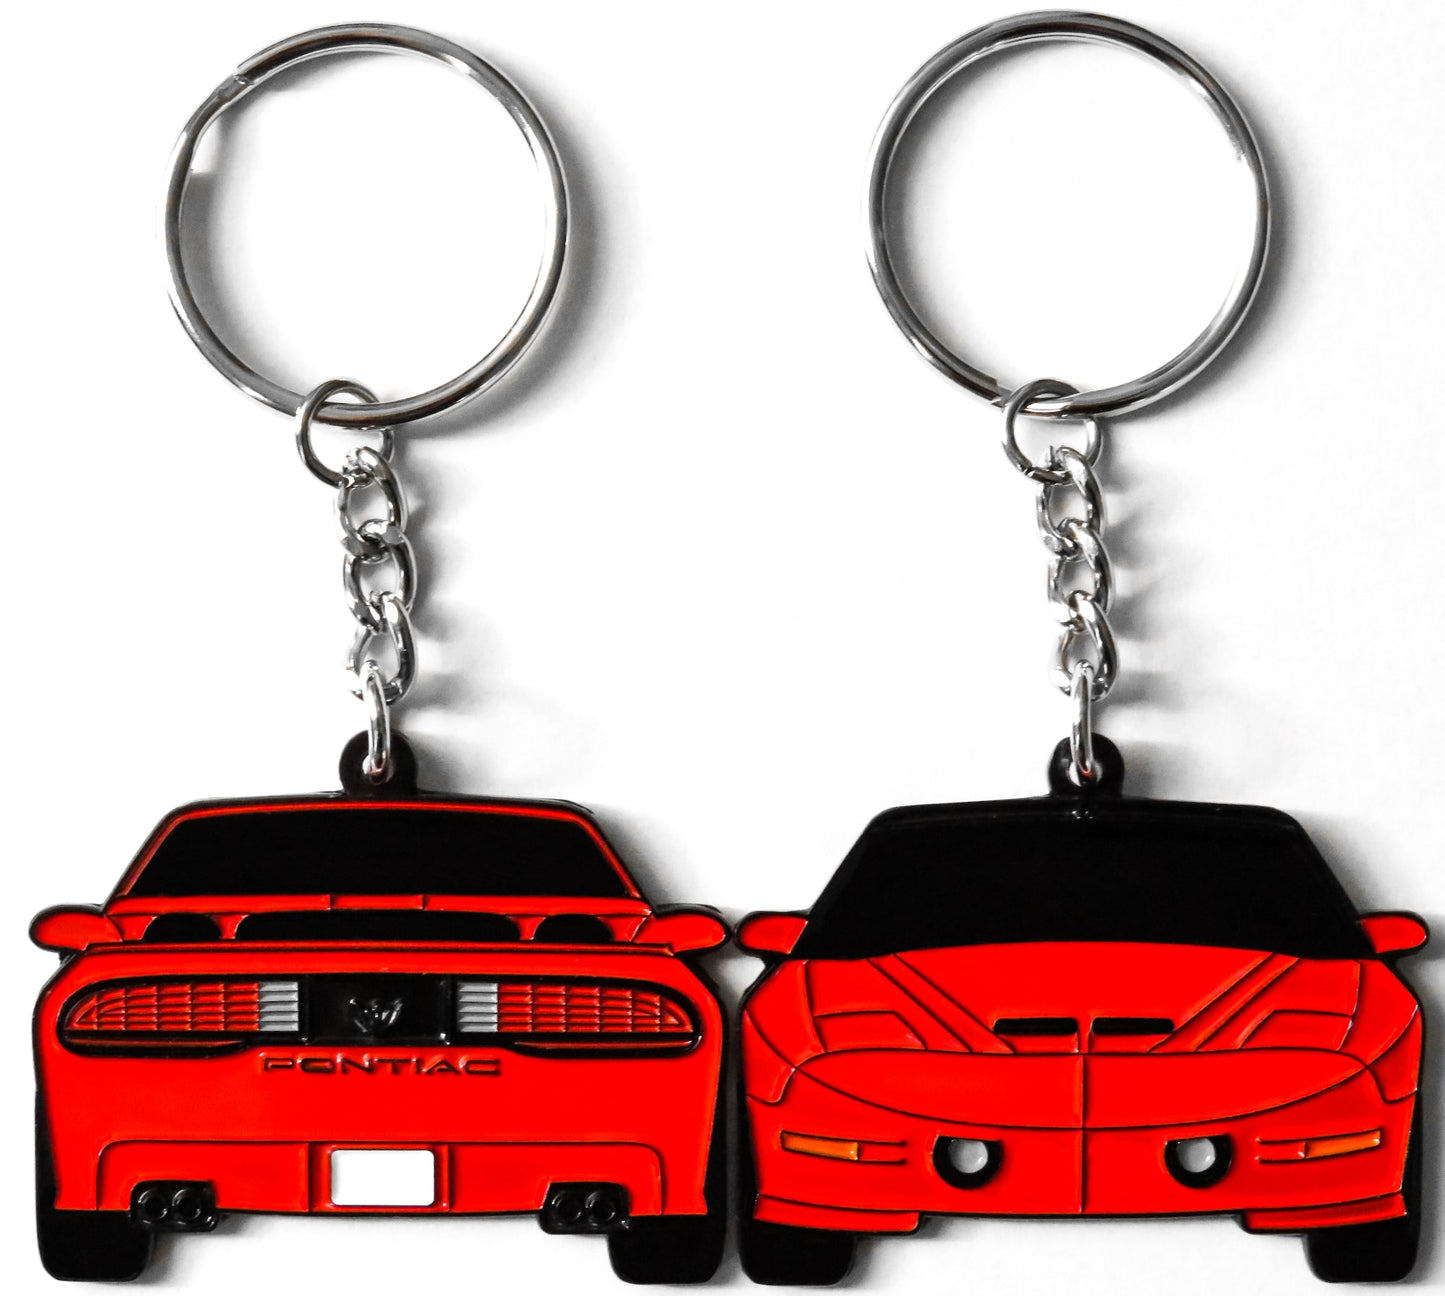 Red Pontiac Trans Am WS6 Formula Firebird Keychain Gift For Car Enthusiasts, Car Guys, Gearheads, Father, Dad, Mother, Mom, Boyfriend, Him, Girlfriend, Her, and more. American muscle car enamel pin patch unique gift idea. Jet tag key ring for Pontiac owners and fans. 1993, 1994, 1995, 1996, and 1997